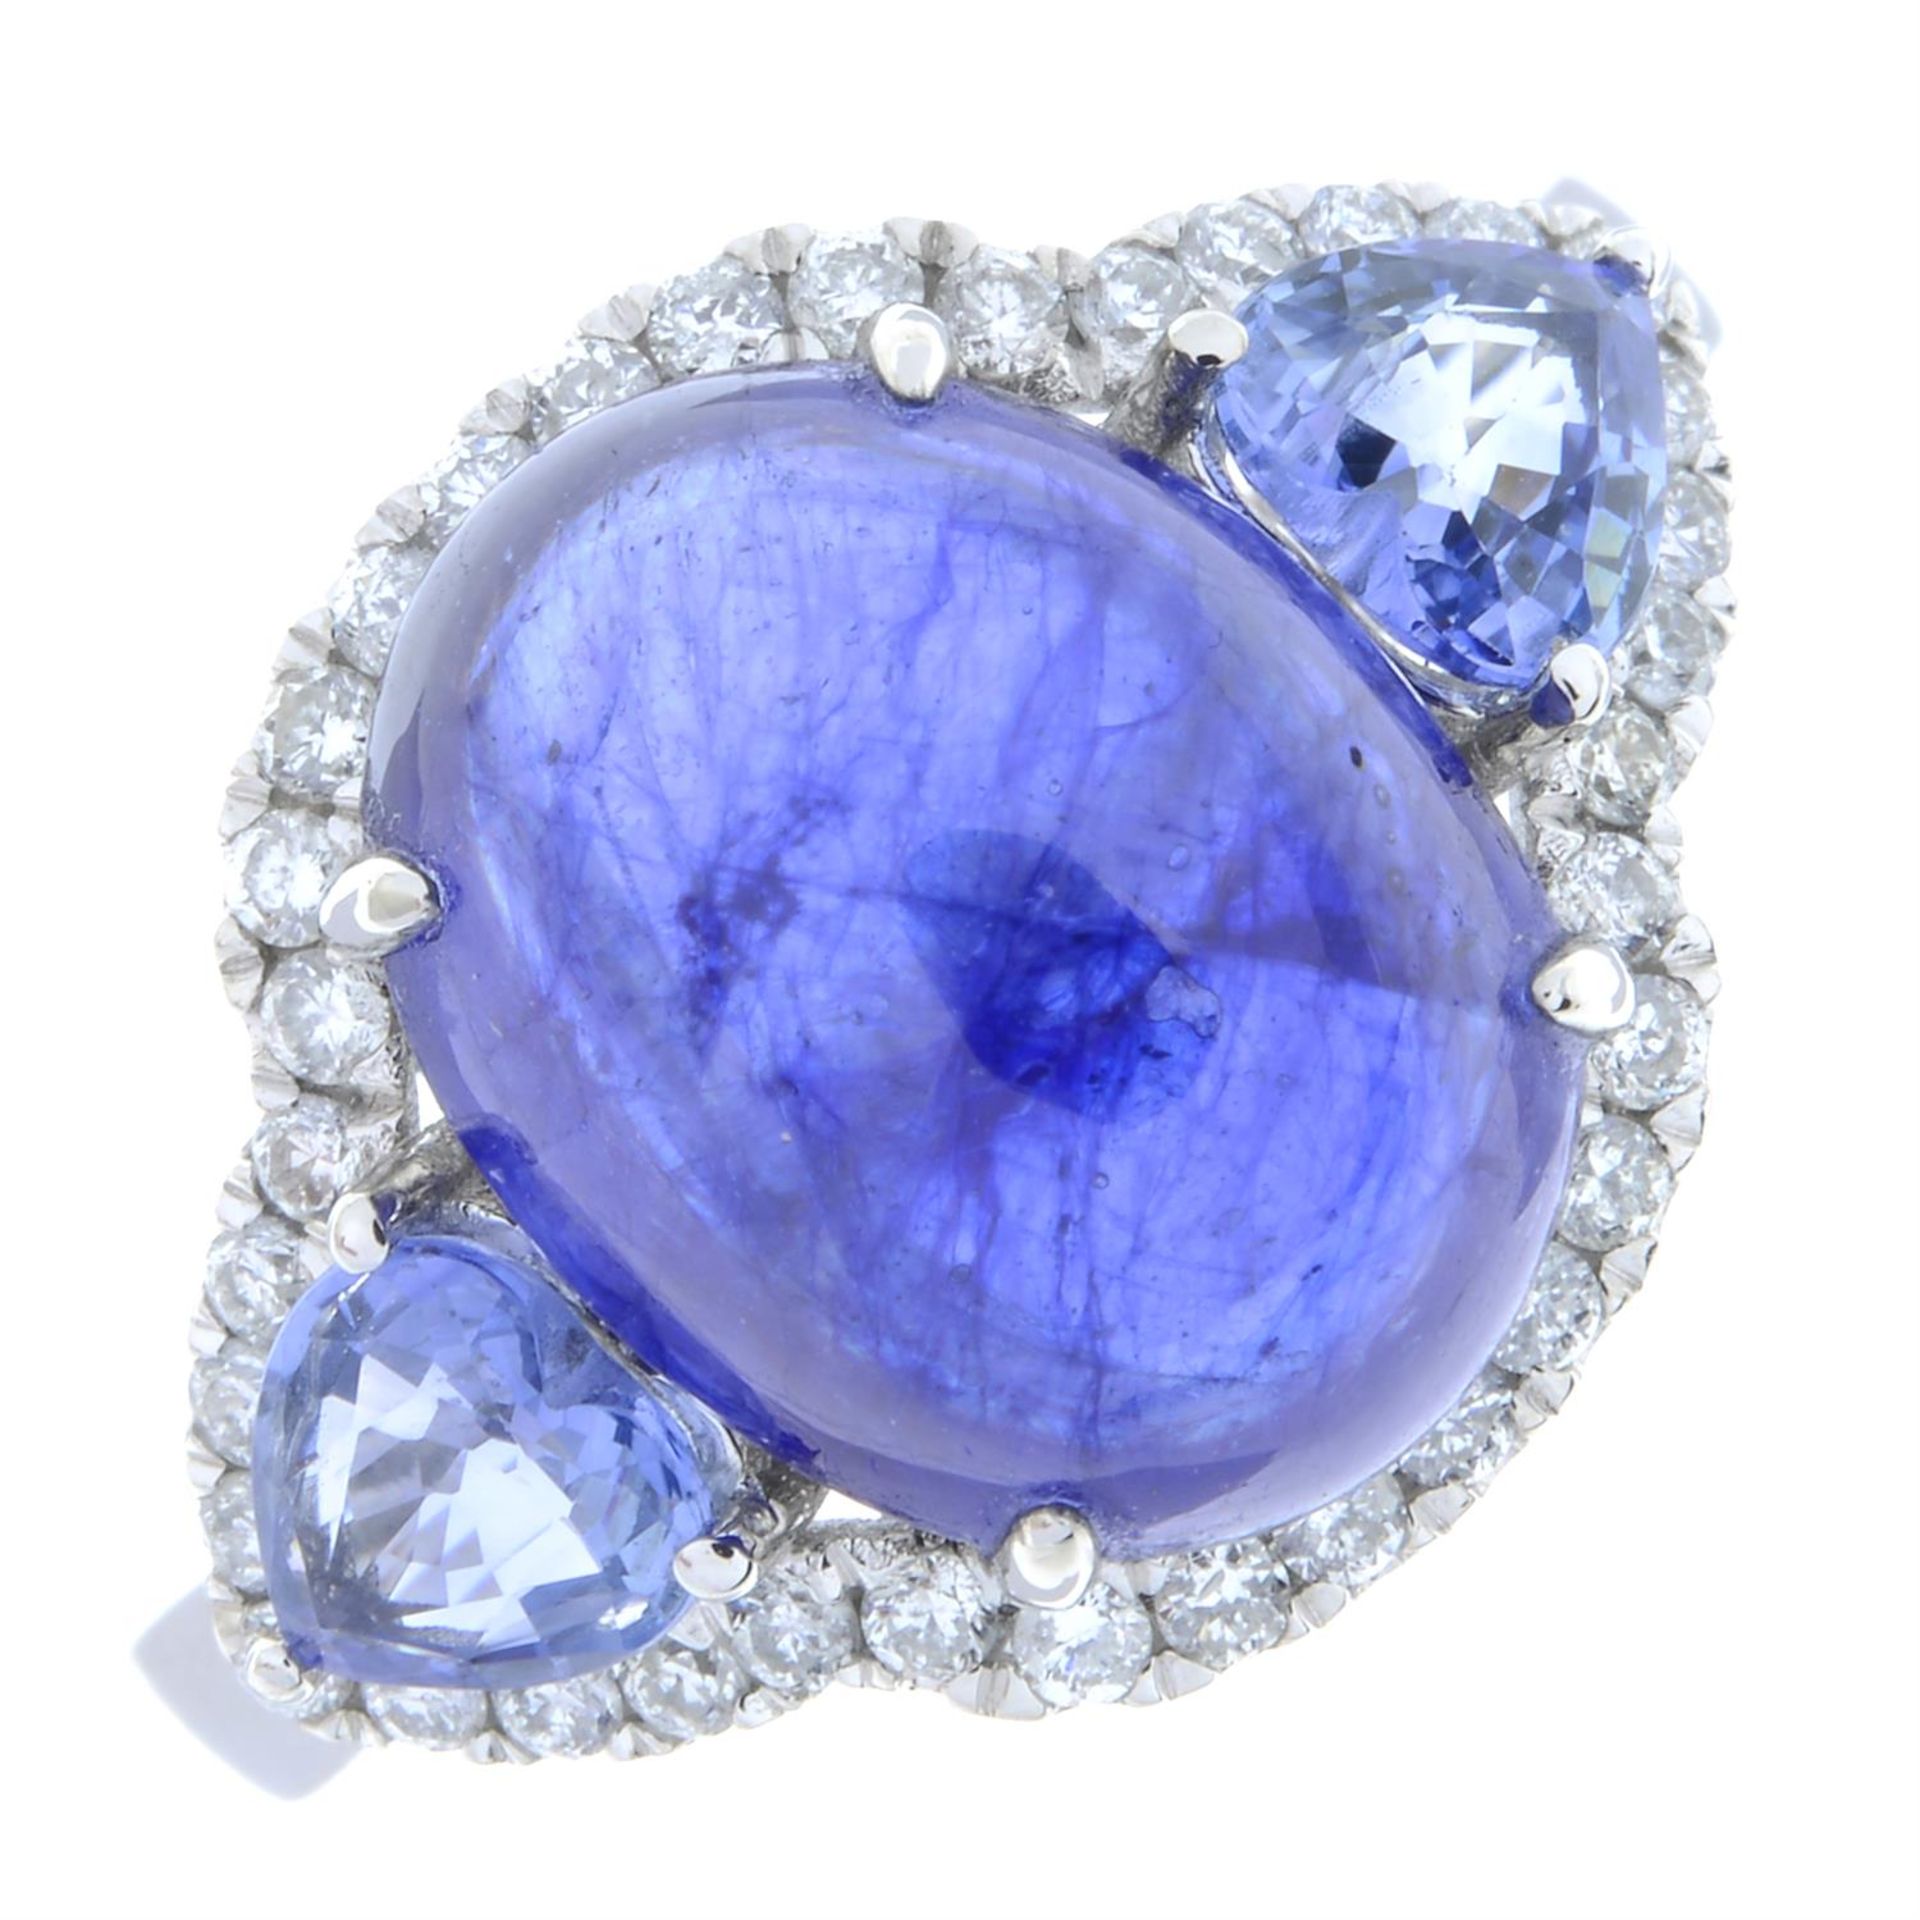 A glass-filled sapphire cabochon, heart-shape sapphire and brilliant-cut diamond dress ring. - Image 2 of 5